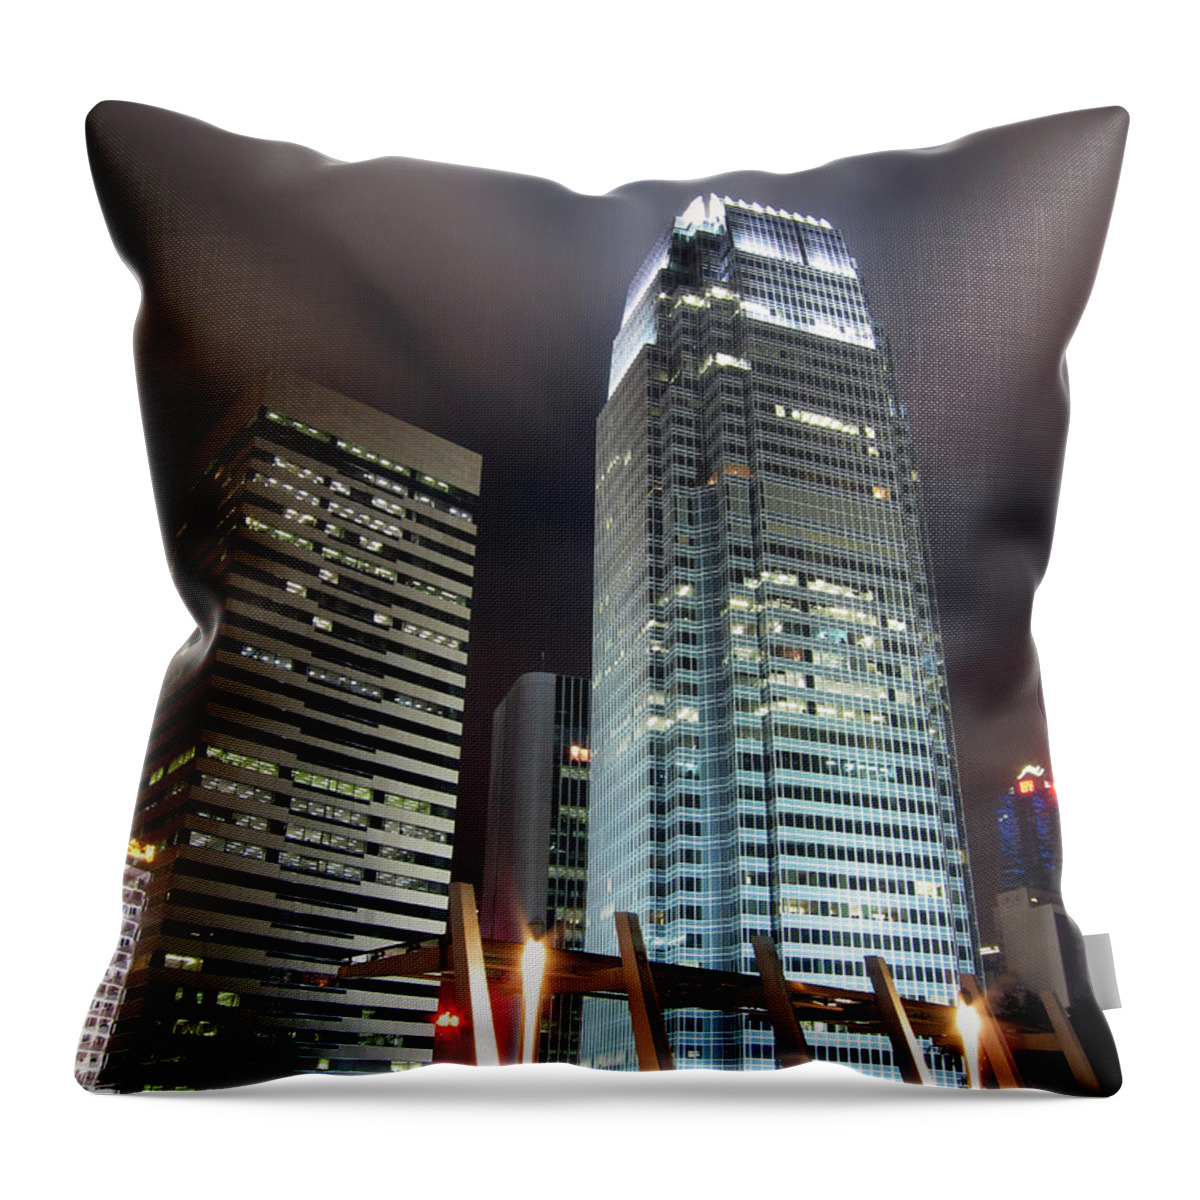 Expertise Throw Pillow featuring the photograph Business Buildings In Hong Kong At Night by Bluekite